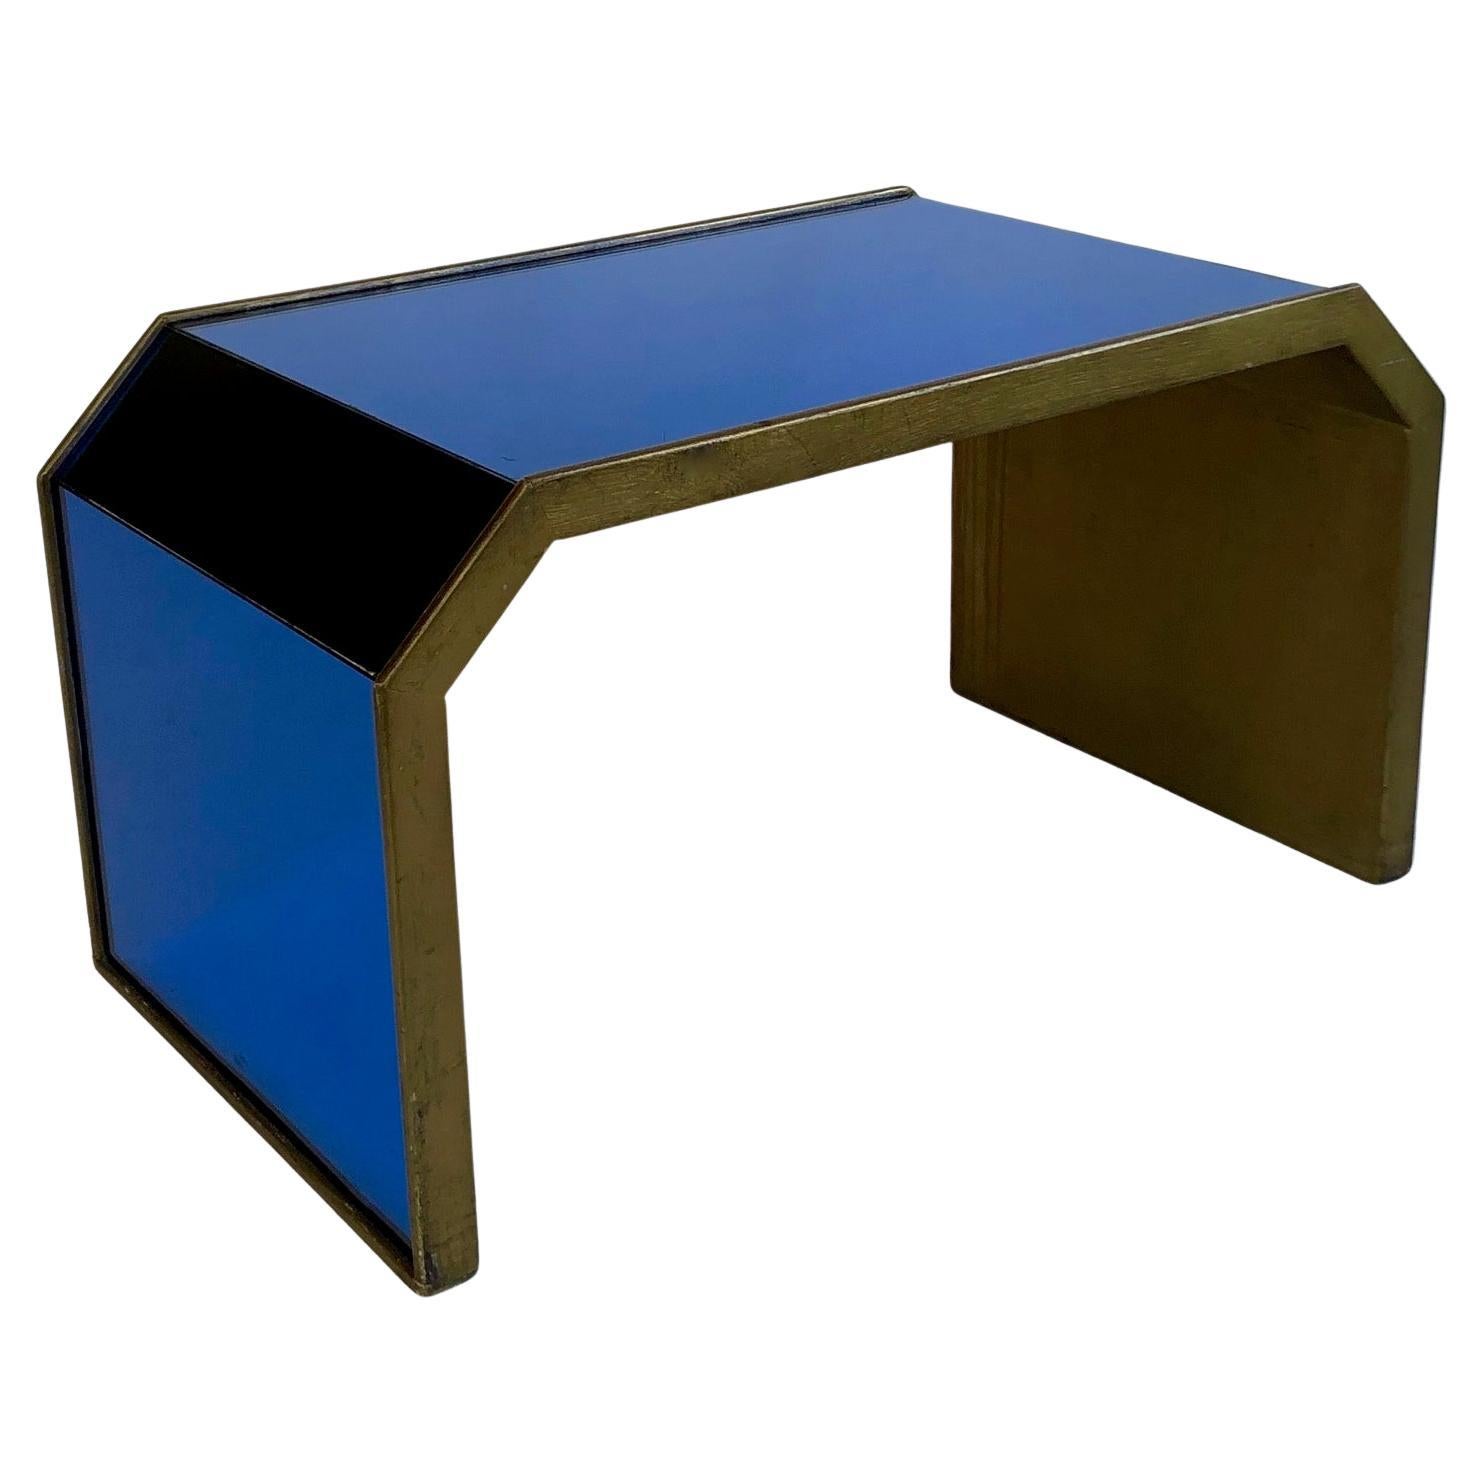 Art Deco blue mirrored side table with giltwood surround, 1920's to 1950's, UK For Sale